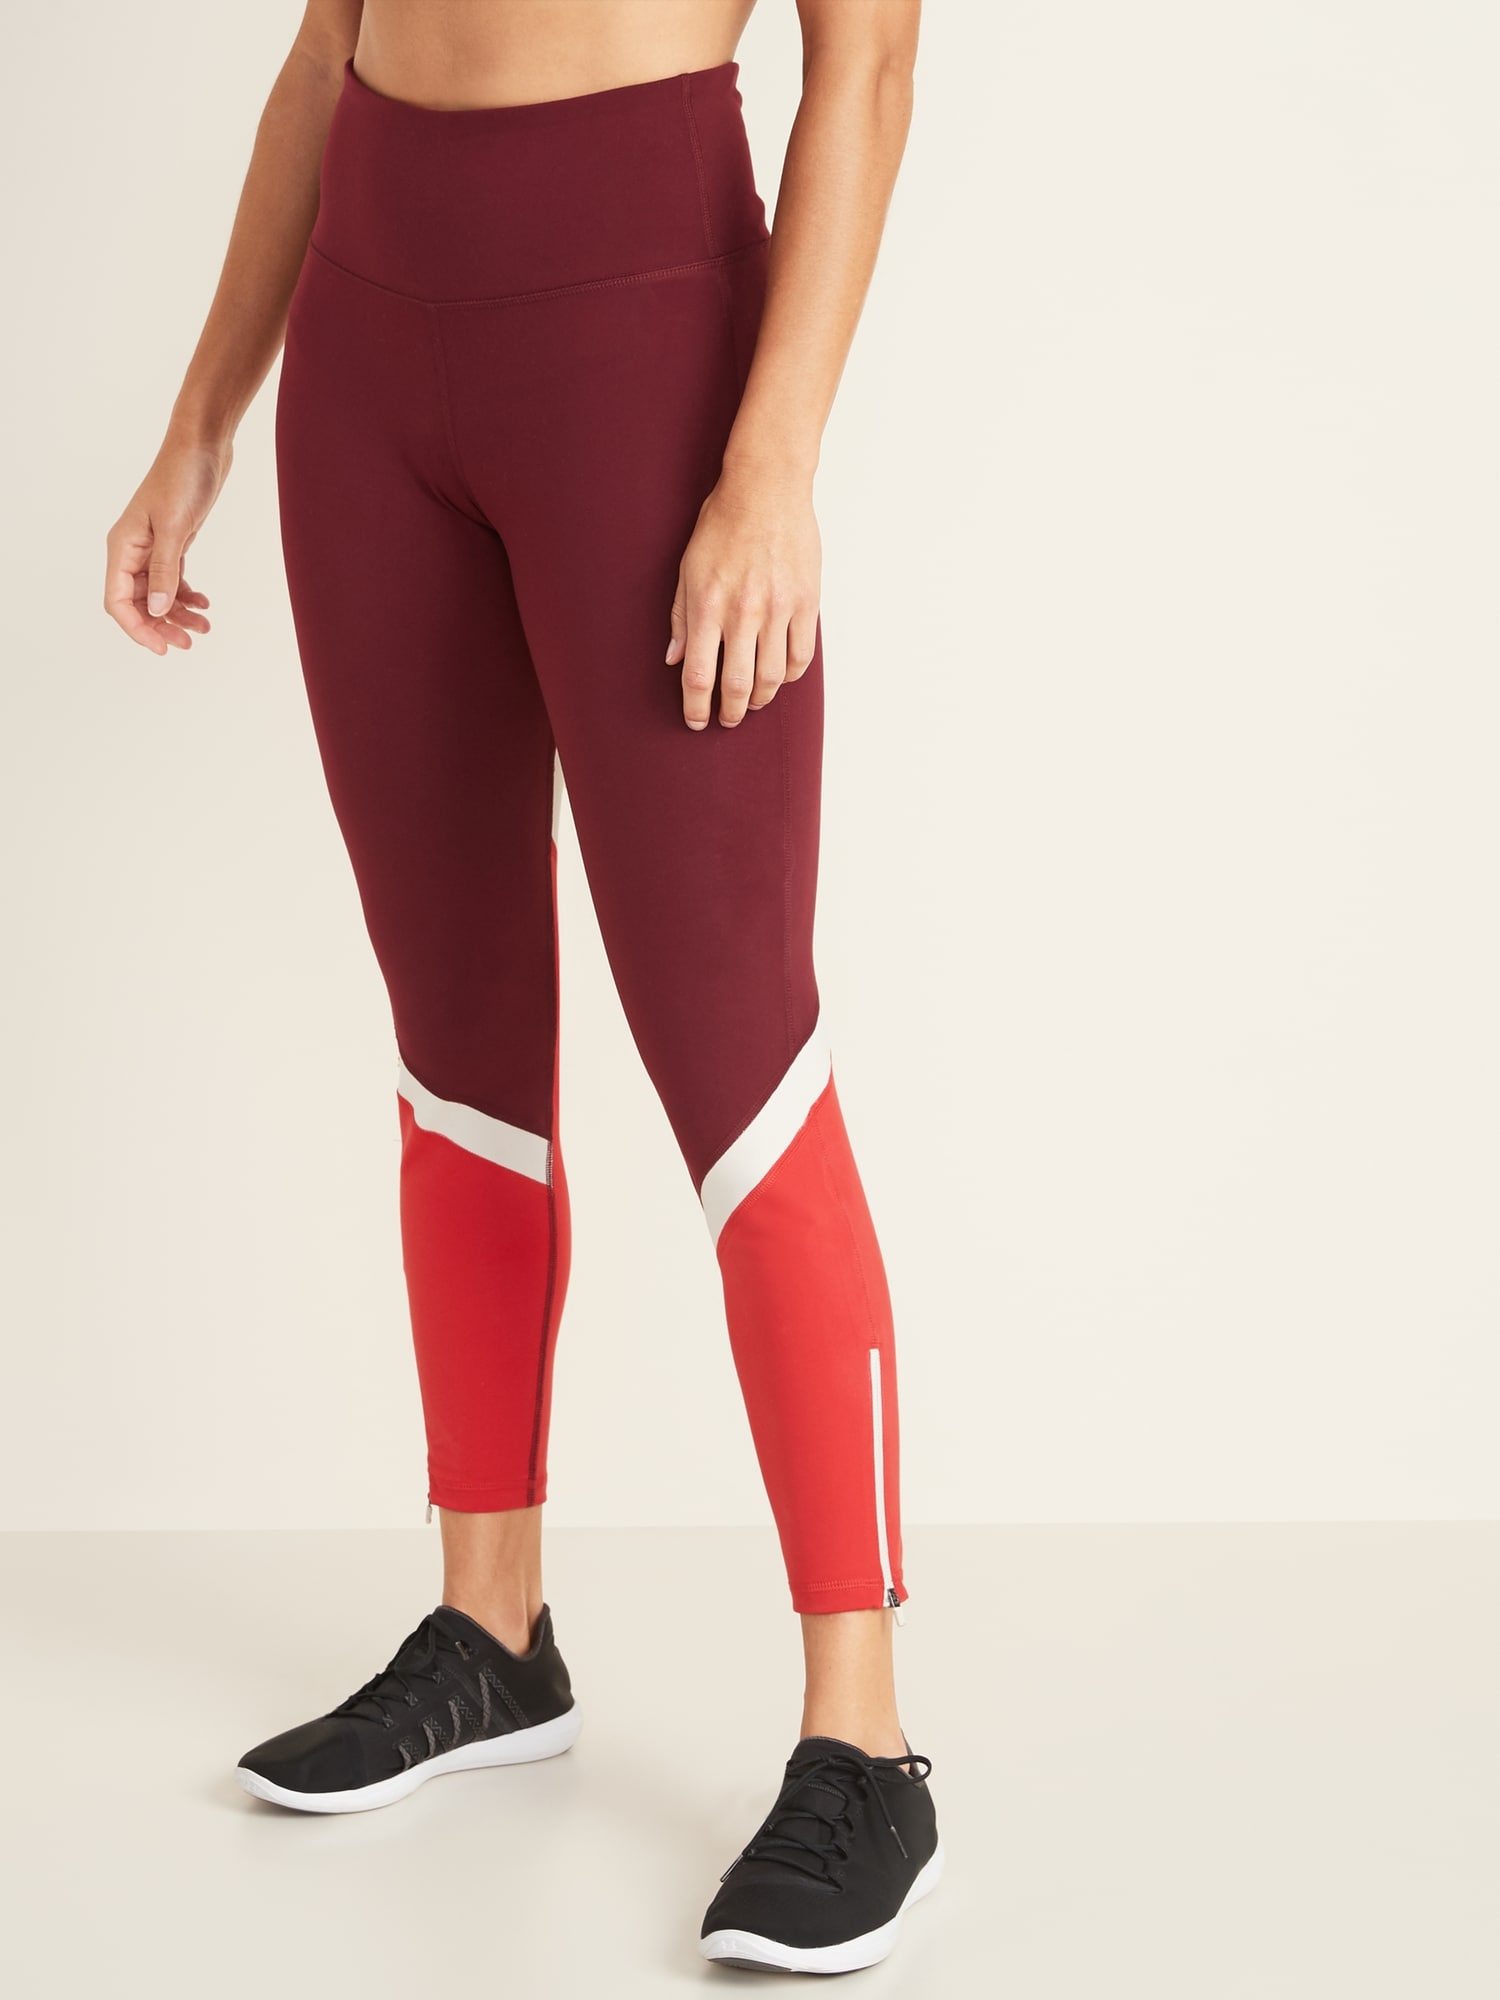 Old Navy Elevate Leggings Green Size XS - $18 (40% Off Retail